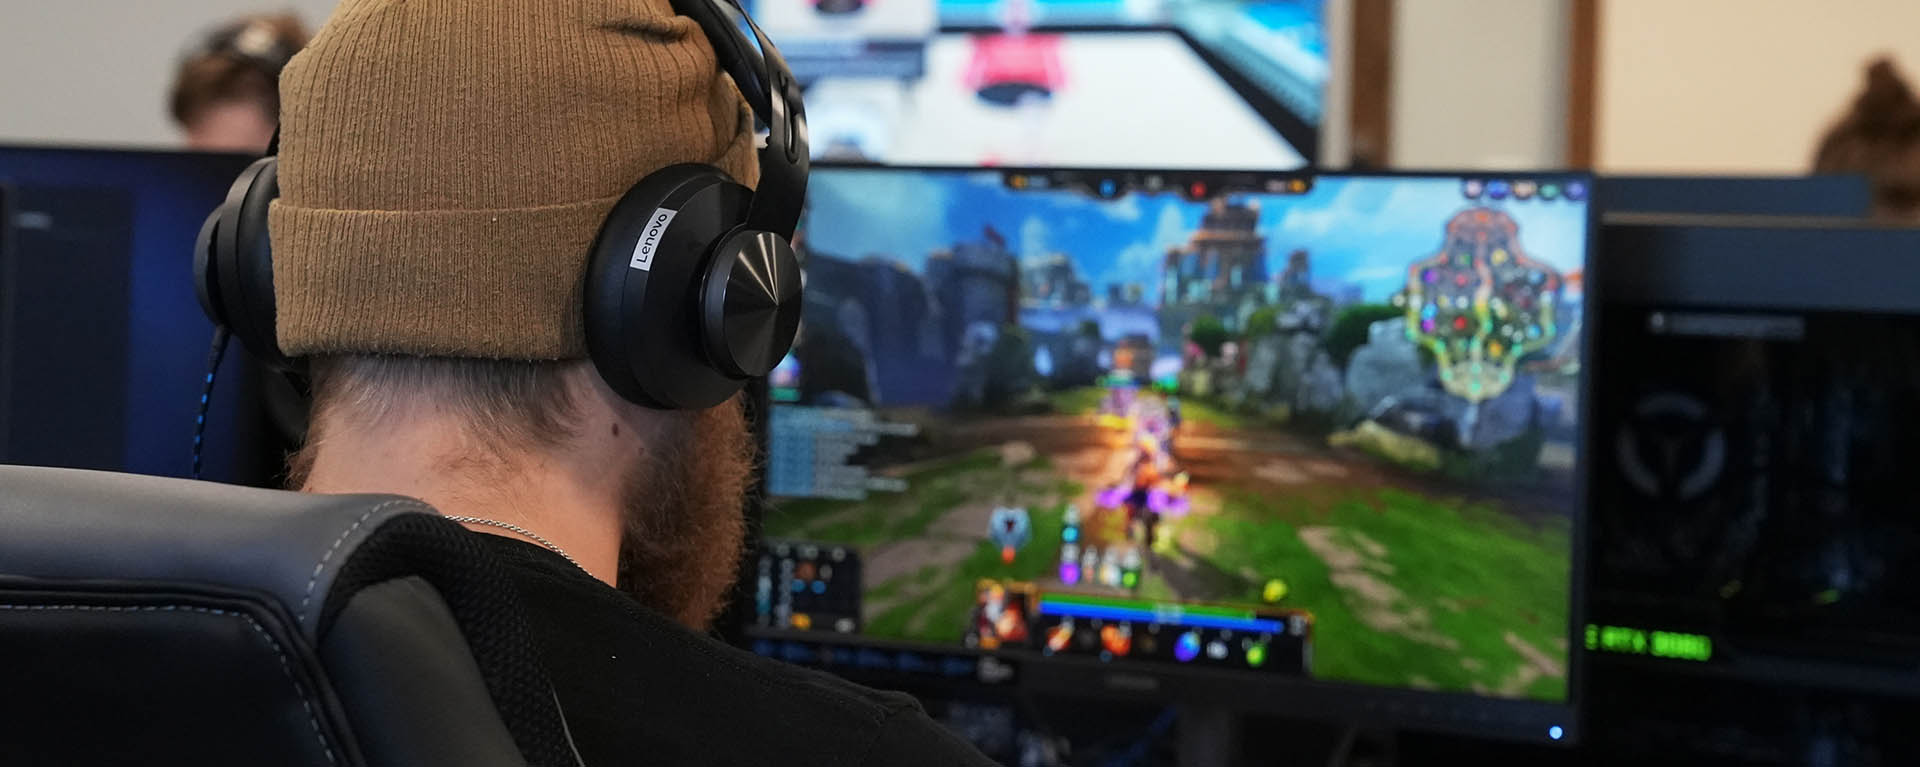 A student plays a game on a computer screen in the esports lounge.